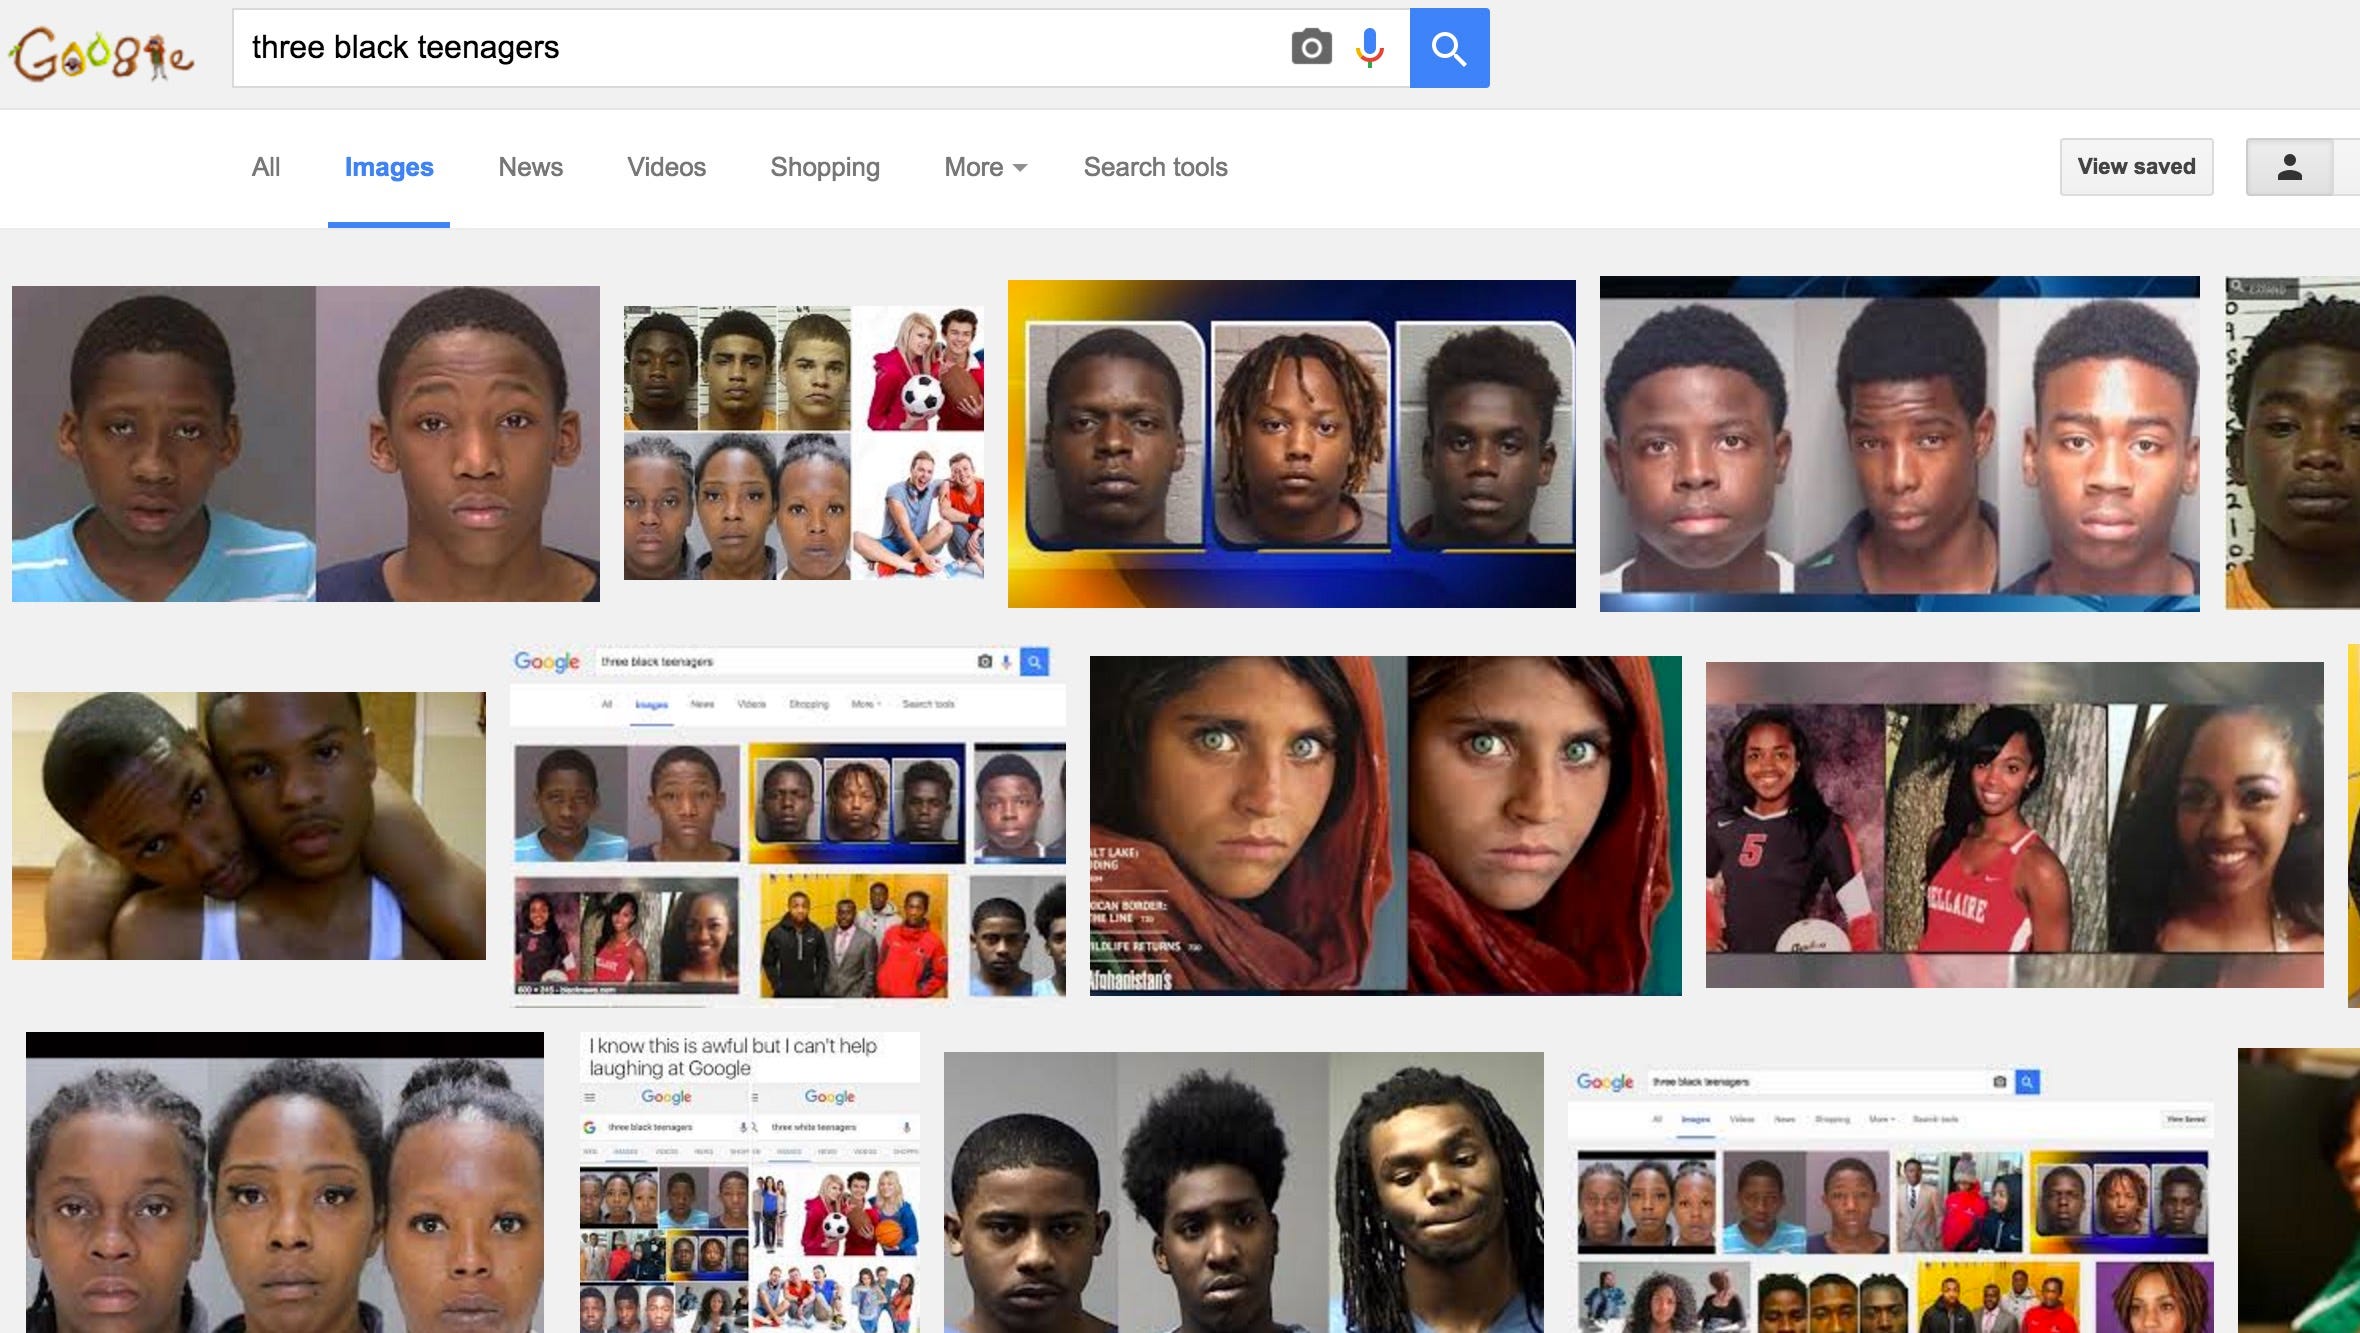 Three black teenagers' Google search sparks outrage